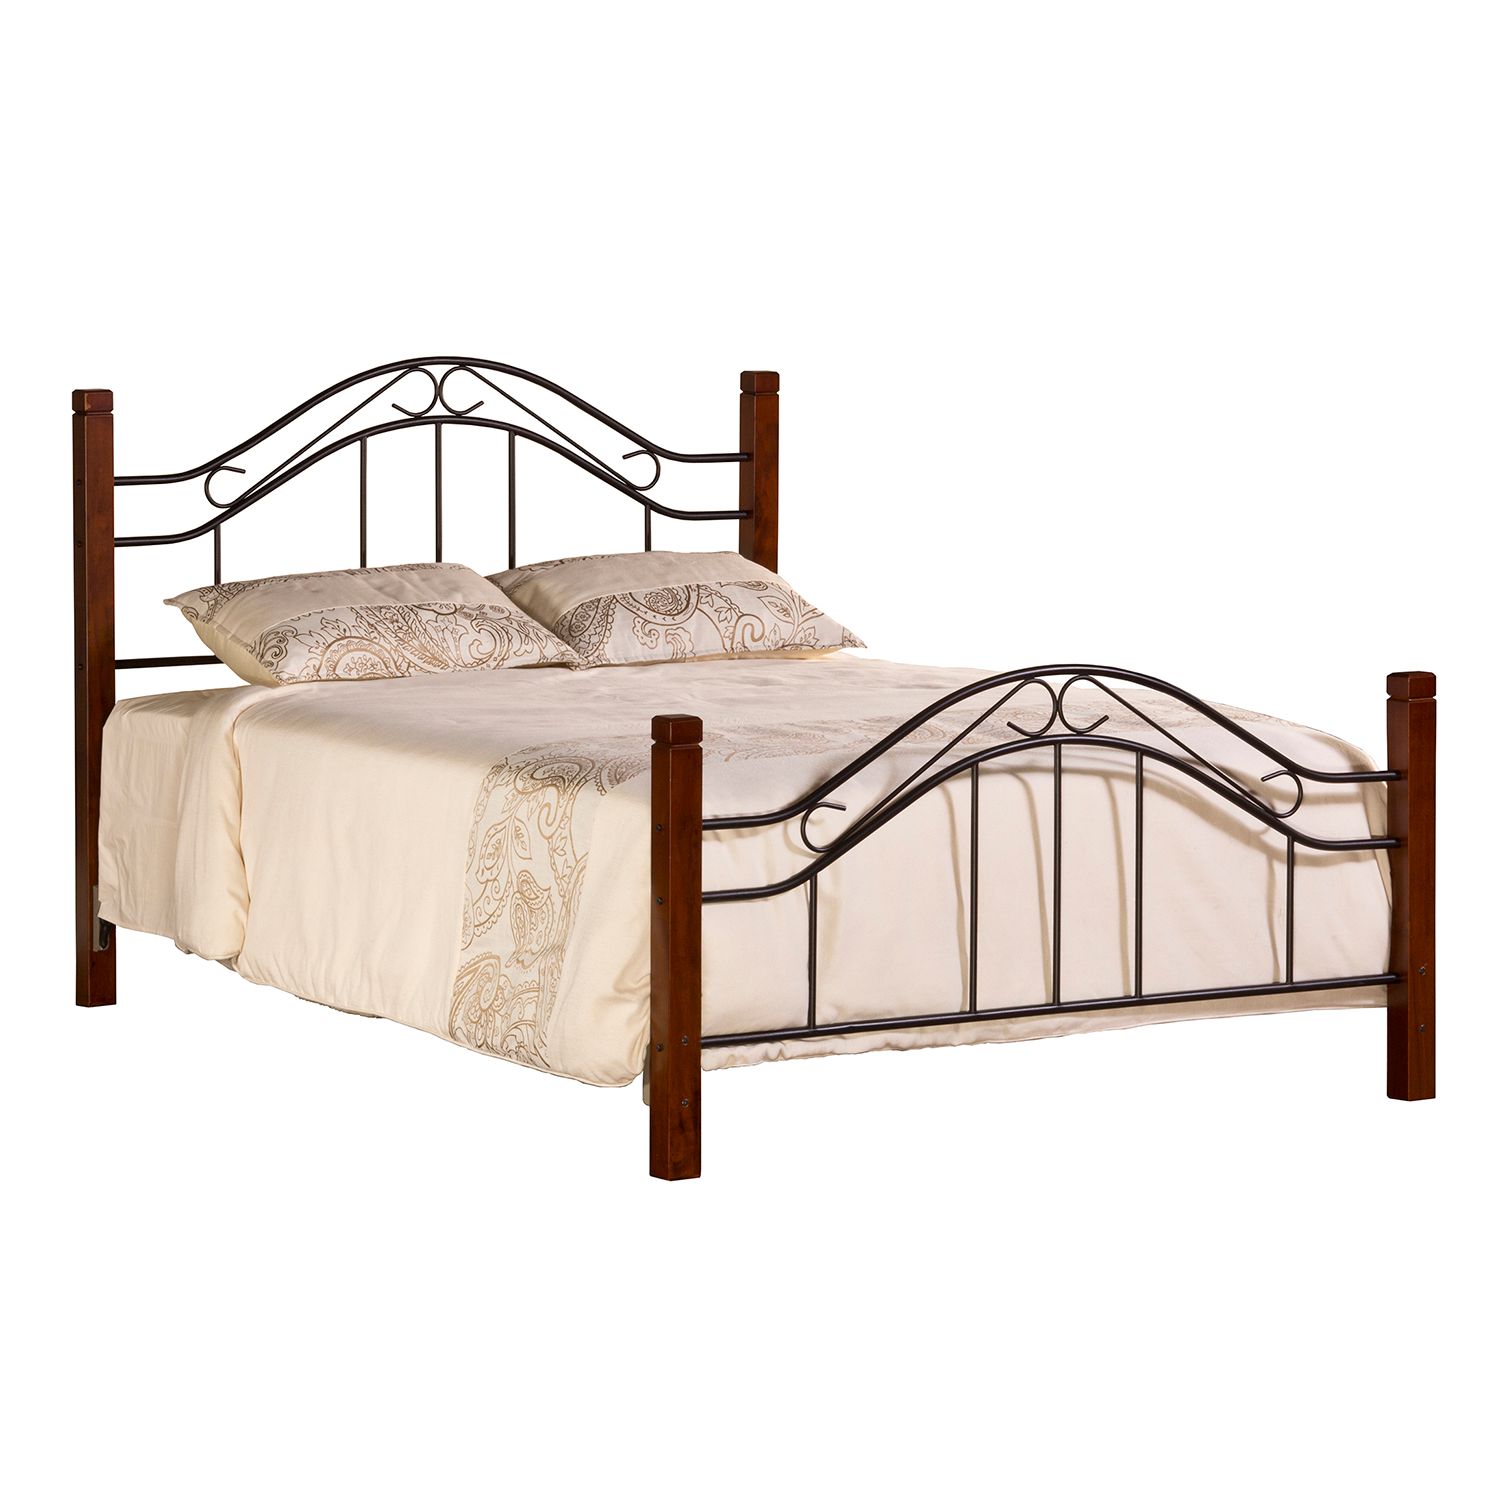 Image for Hillsdale Furniture Matson Bed at Kohl's.